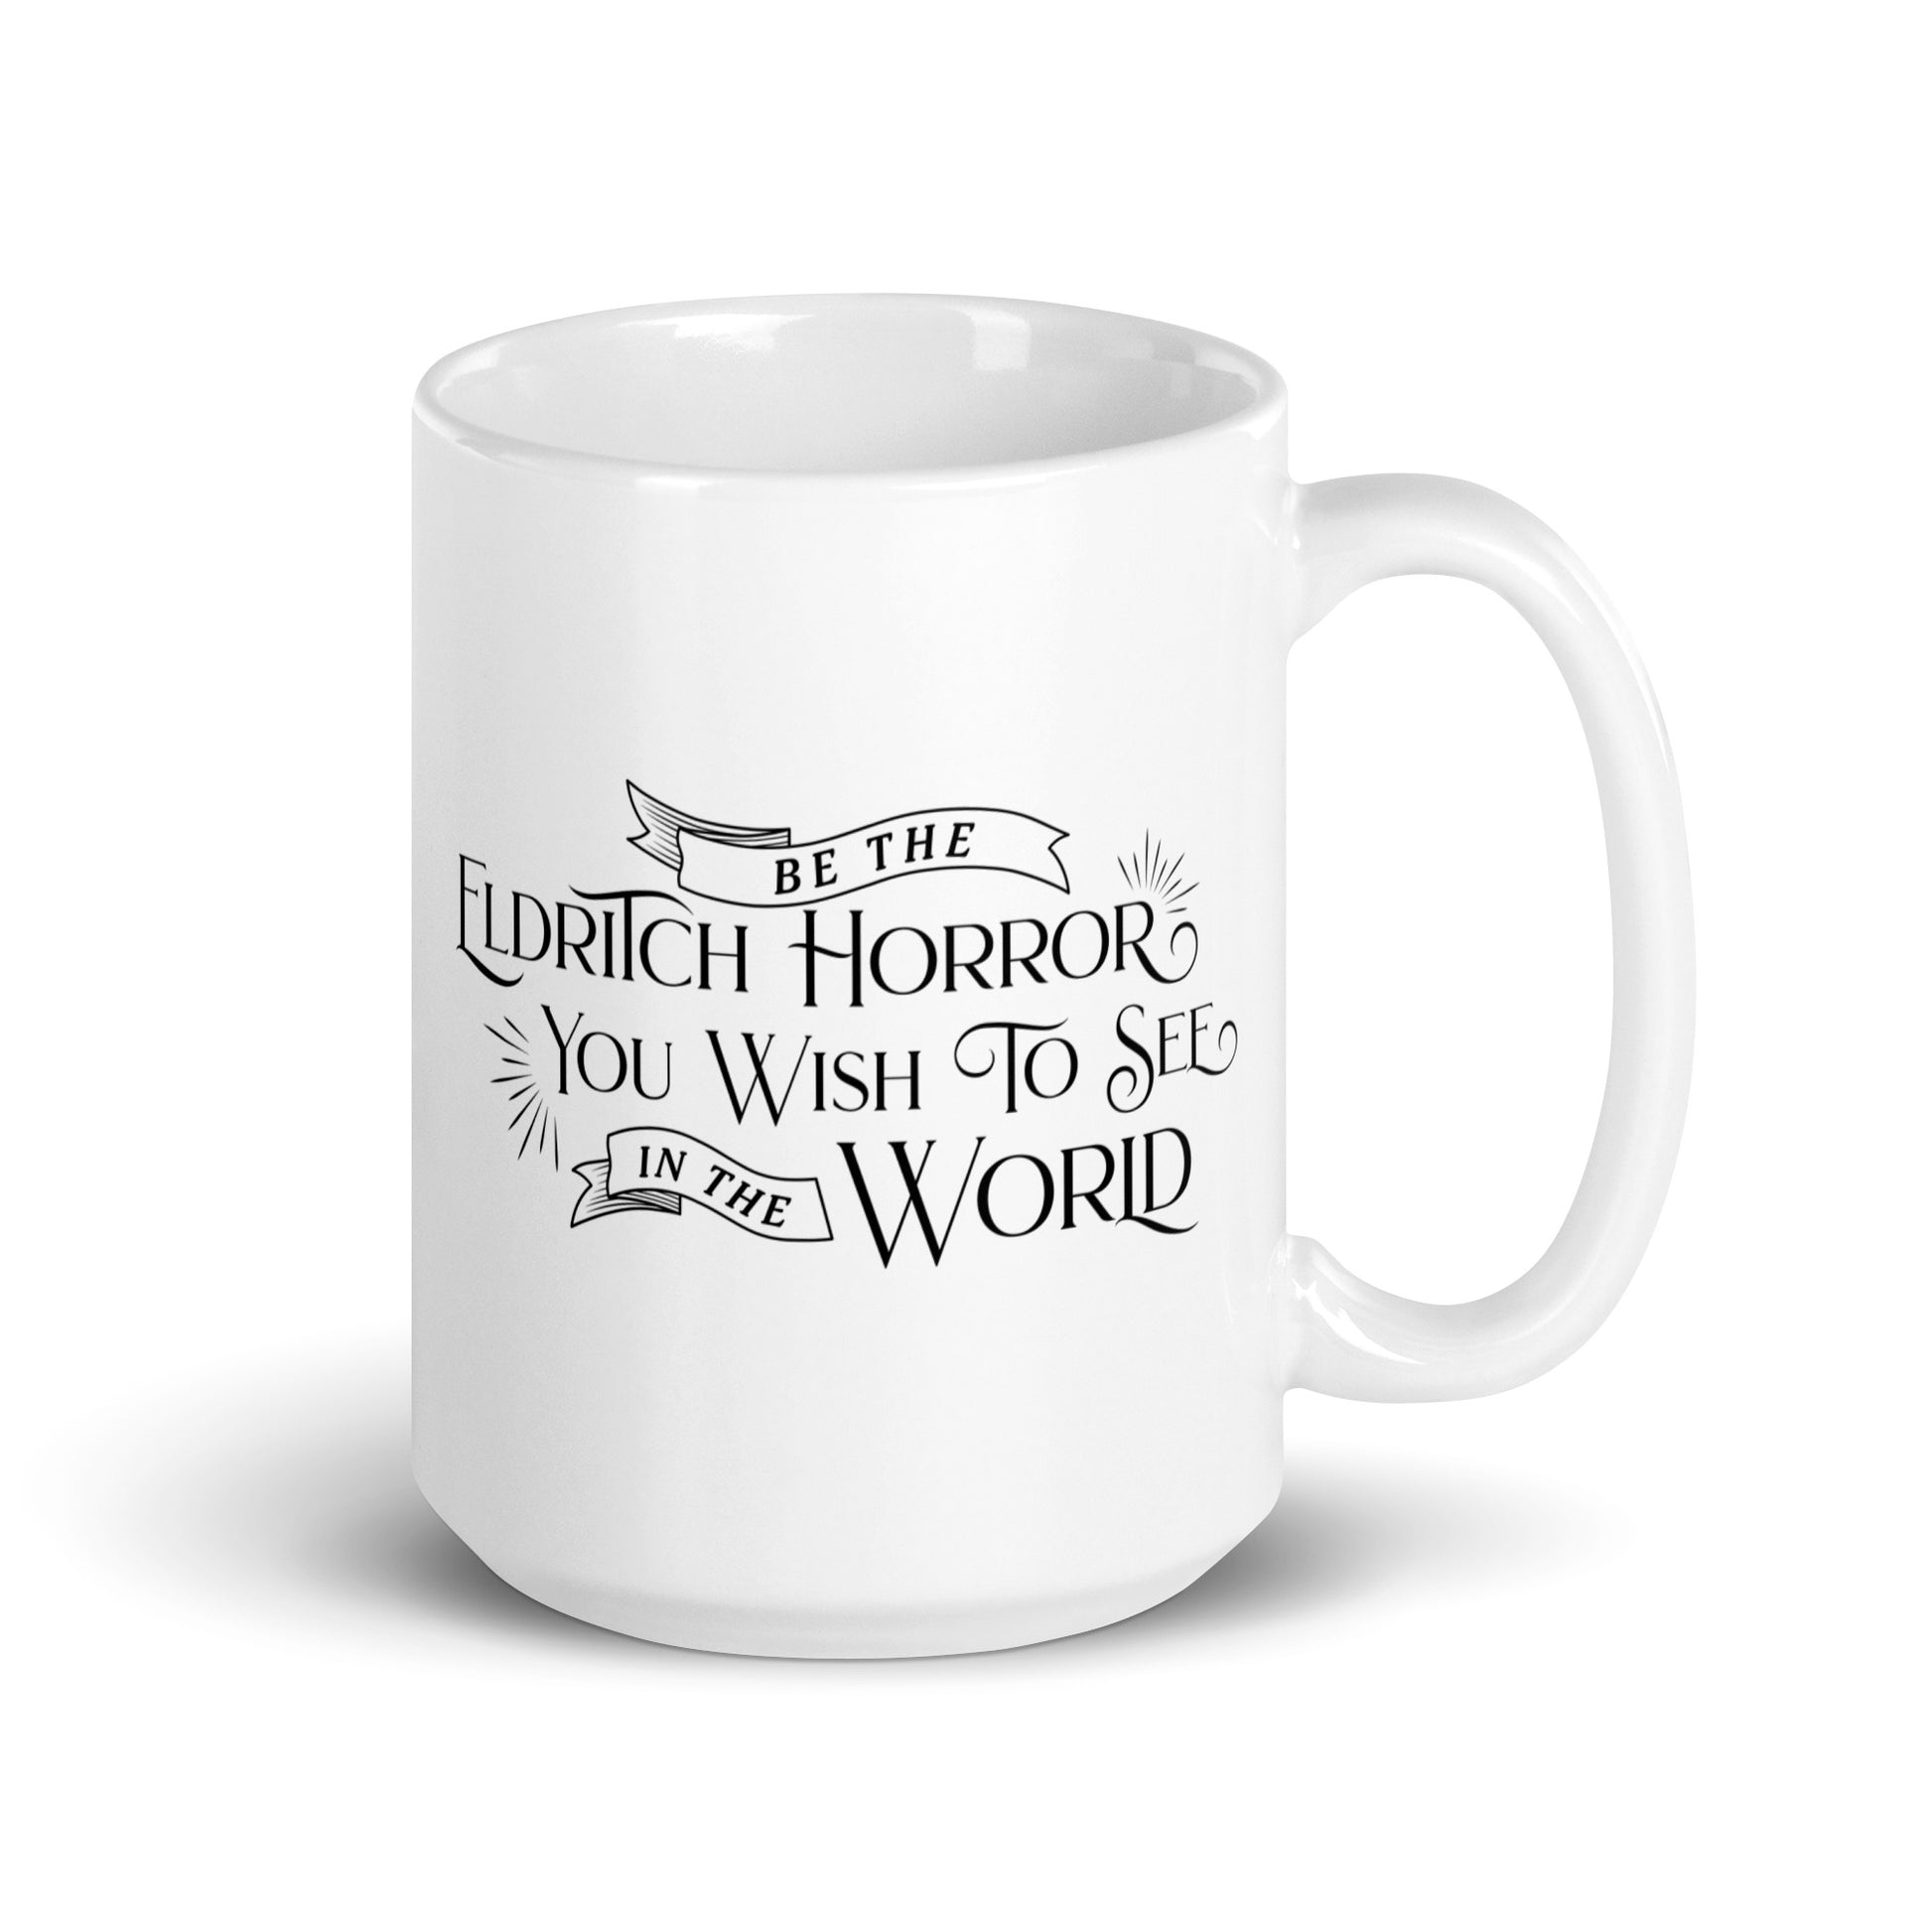 A white, ceramic, 15 ounce mug featuring black text in a semi-gothic style font that reads "Be the Eldritch Horror You Wish To See In The World"